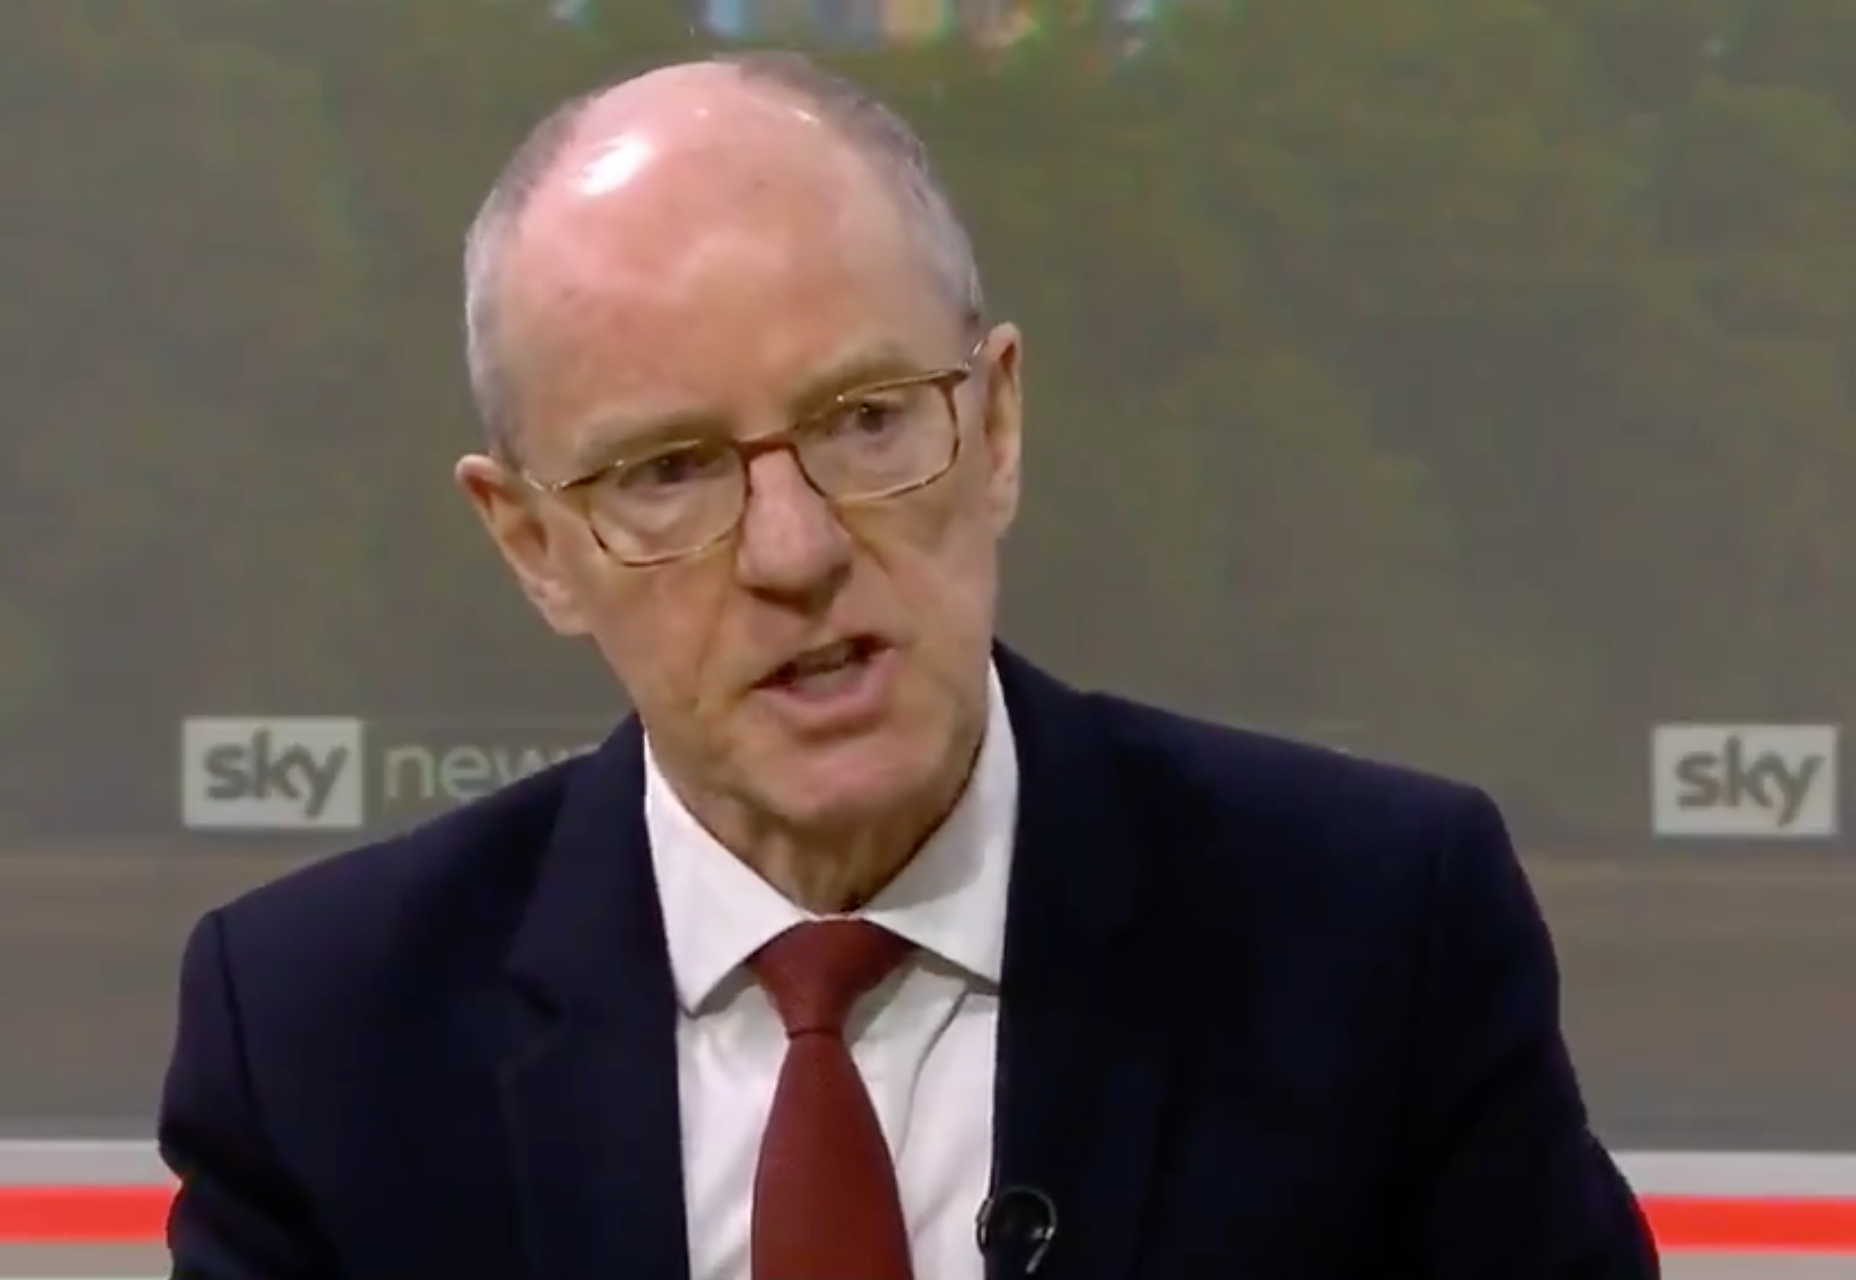 Schools minster Nick Gibb has said more details around testing will be released next week